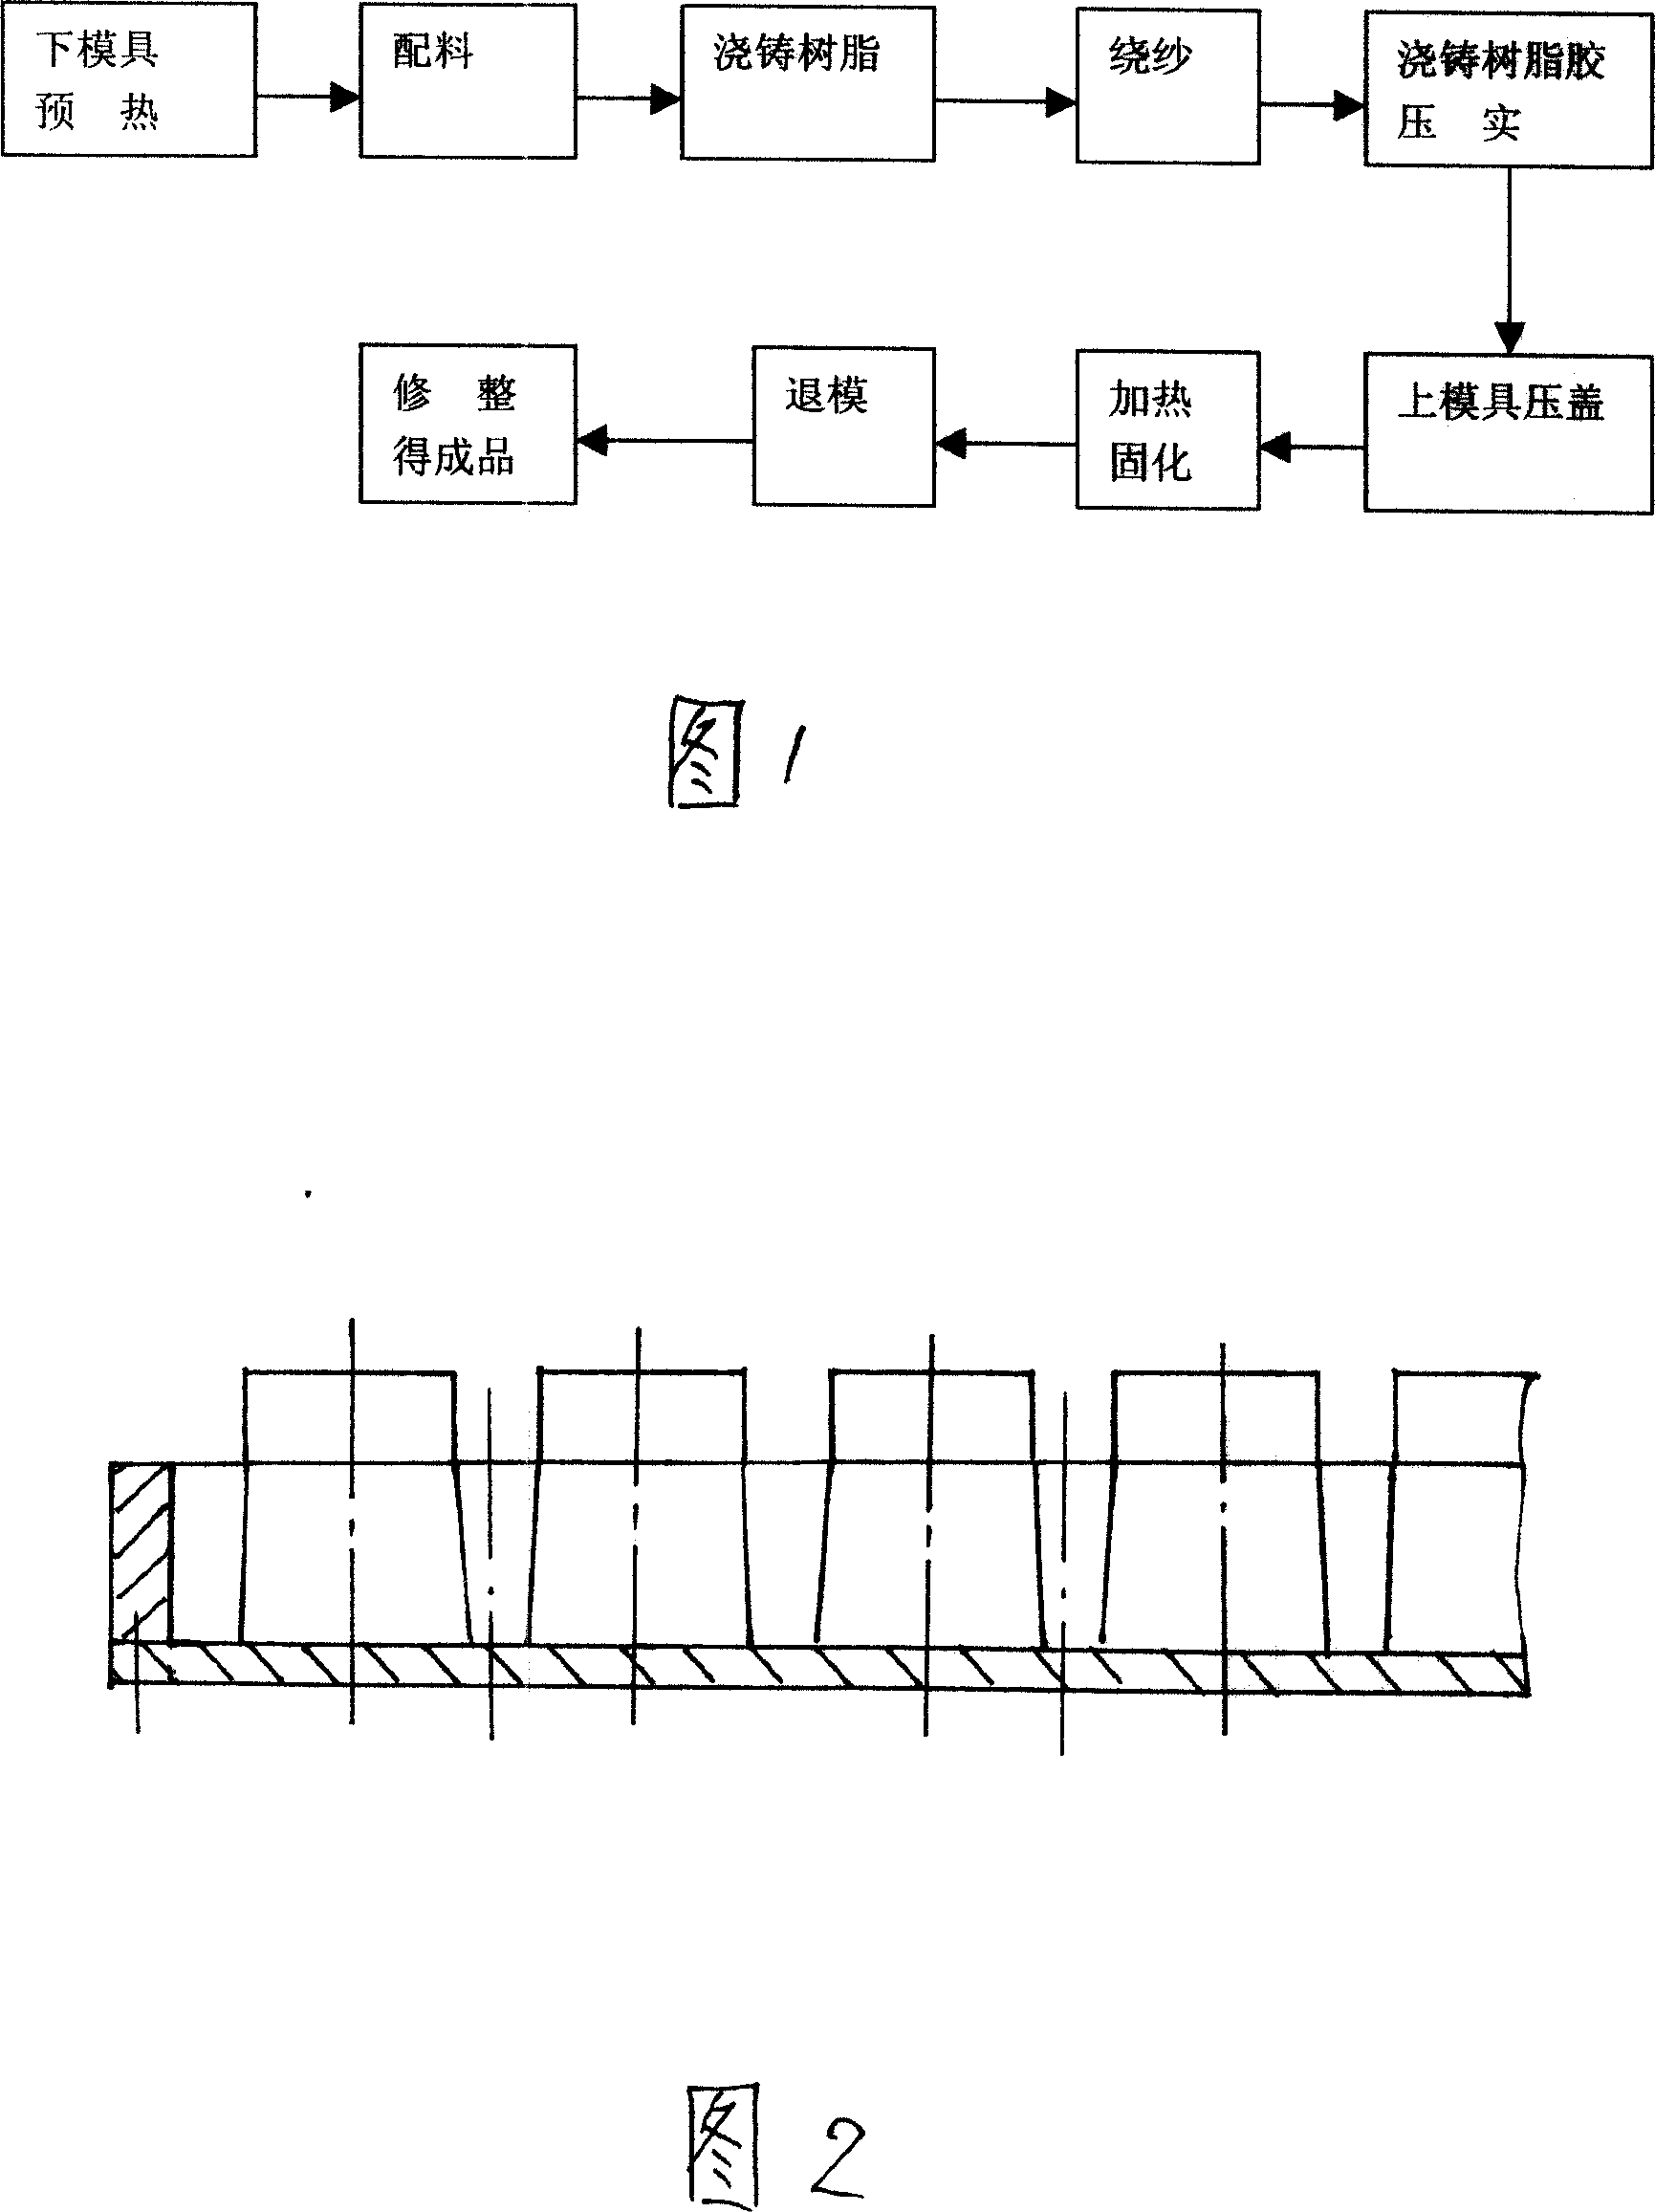 Moulded glass fibre reinforced plastic grille and manufacturing method thereof